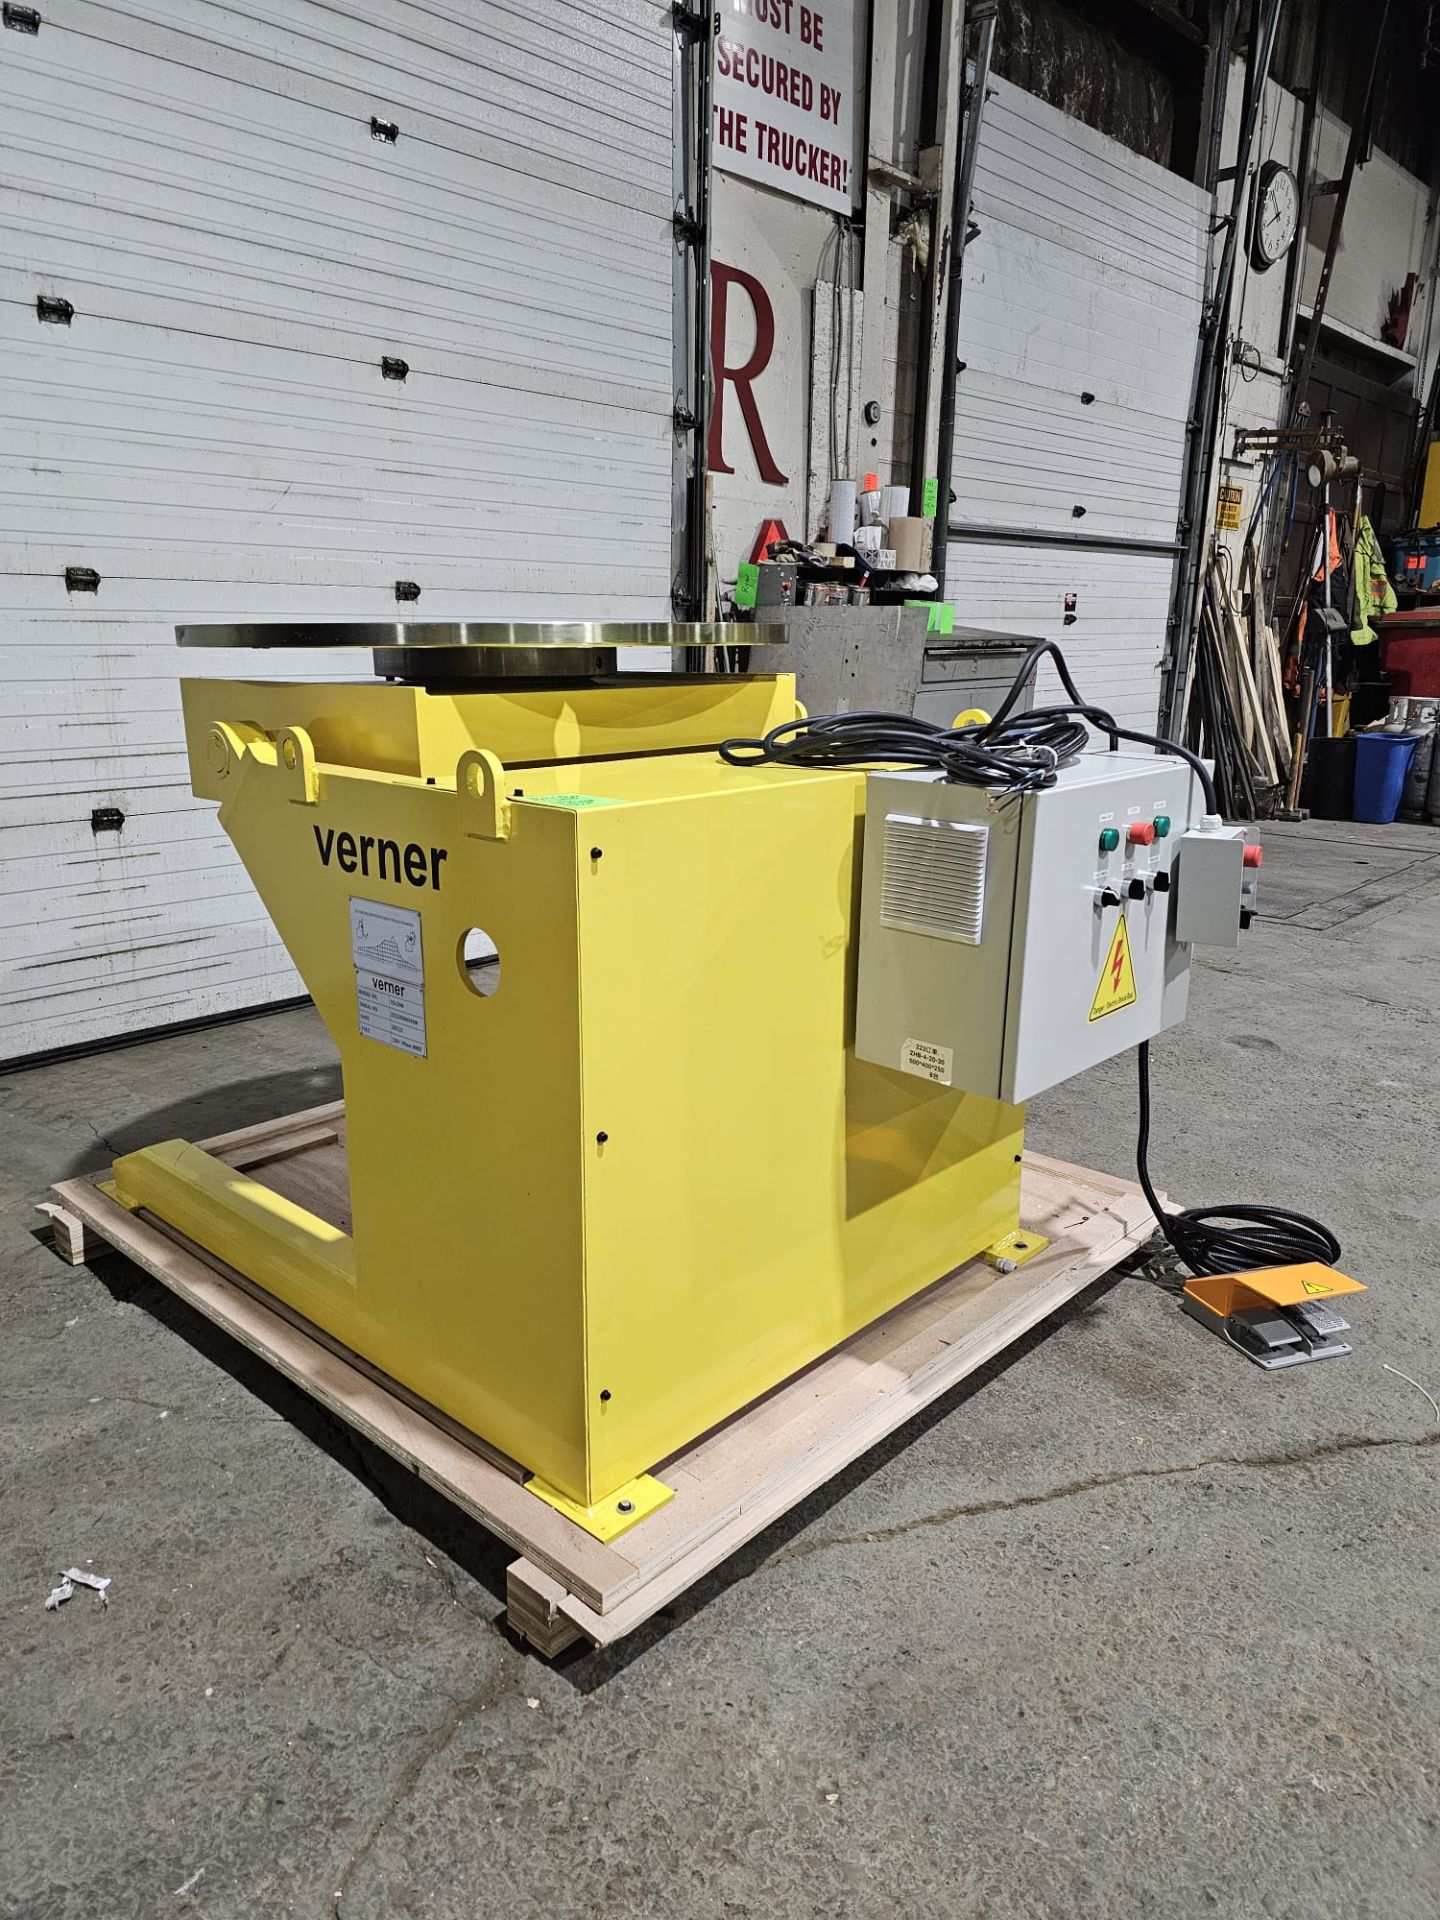 Verner model VD-2500 WELDING POSITIONER 2500lbs capacity - tilt and rotate with variable speed drive - Image 5 of 7